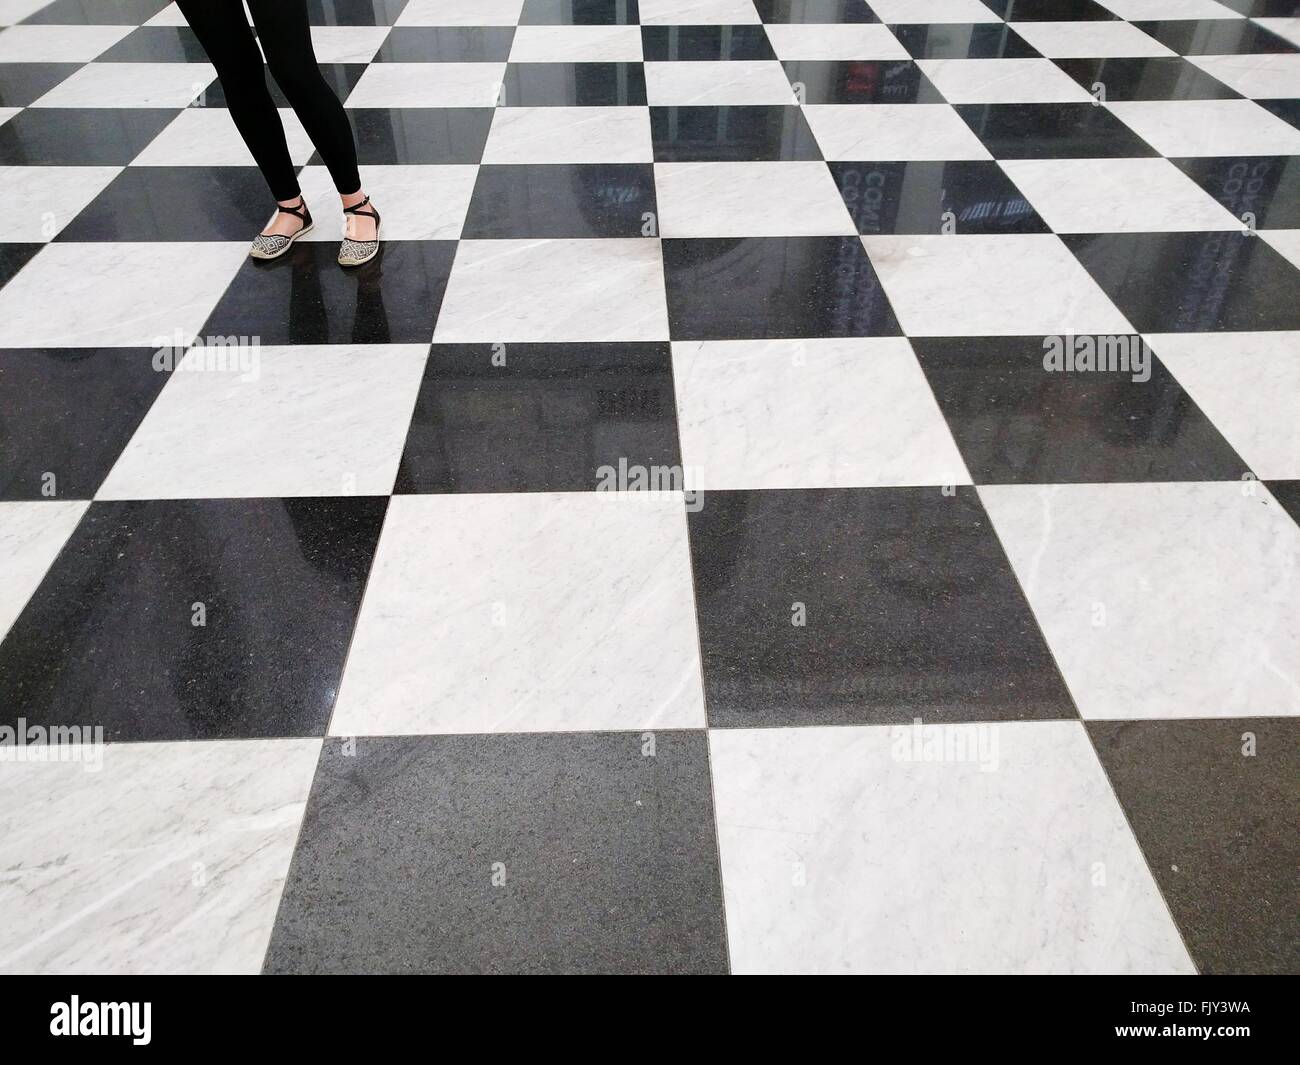 Low Section Of Woman Standing On Checked Pattern Floor Stock Photo